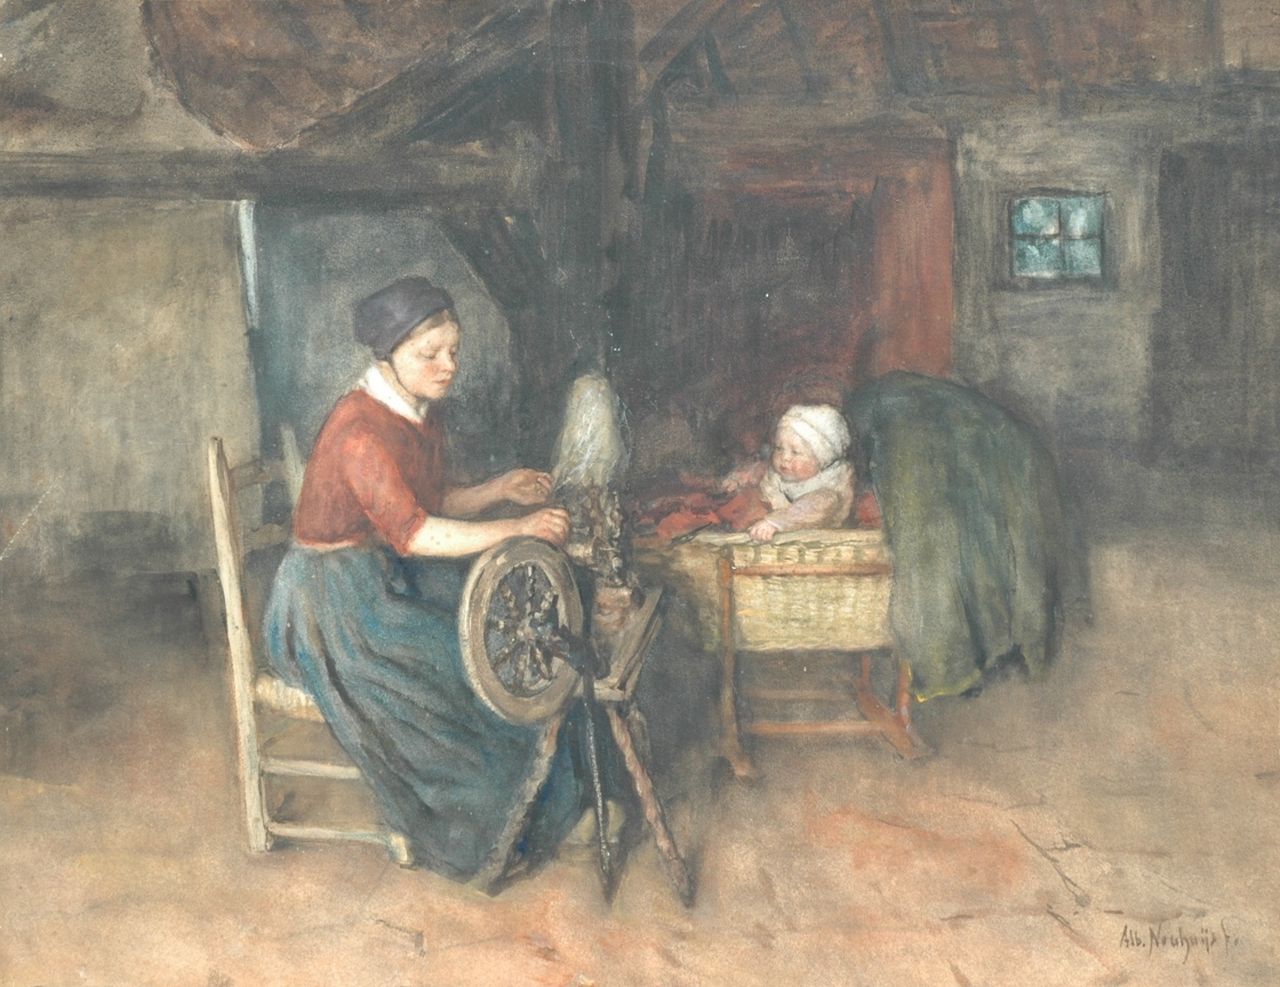 Neuhuys J.A.  | Johannes 'Albert' Neuhuys, Young farmer's wife at the spinning wheel with her baby in a cradle, Aquarell auf Papier auf Holzfaserplatte 52,3 x 67,5 cm, signed l.r.